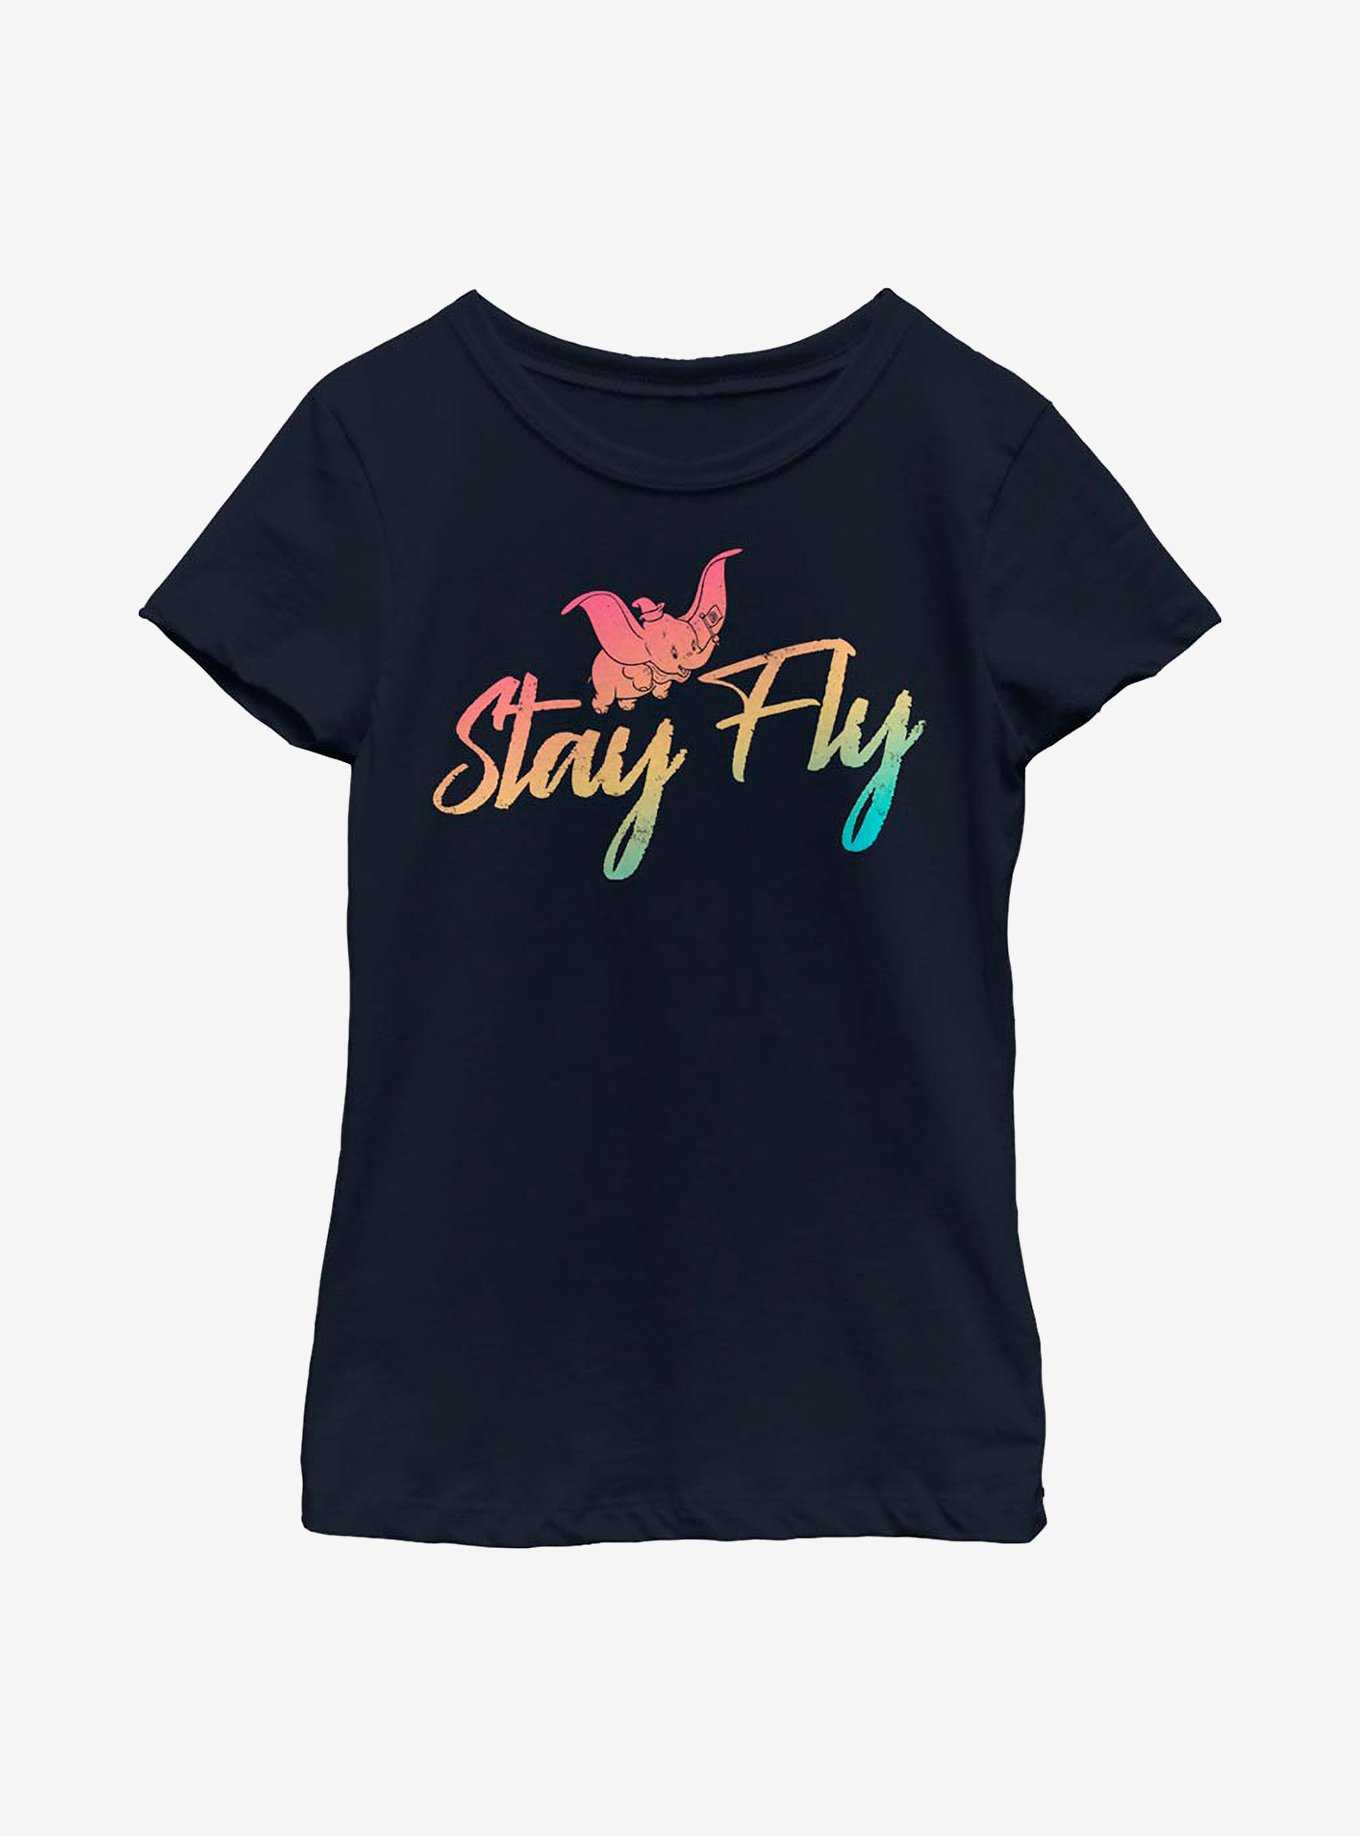 Disney Dumbo Stay Fly Youth Girls T-Shirt, , hi-res